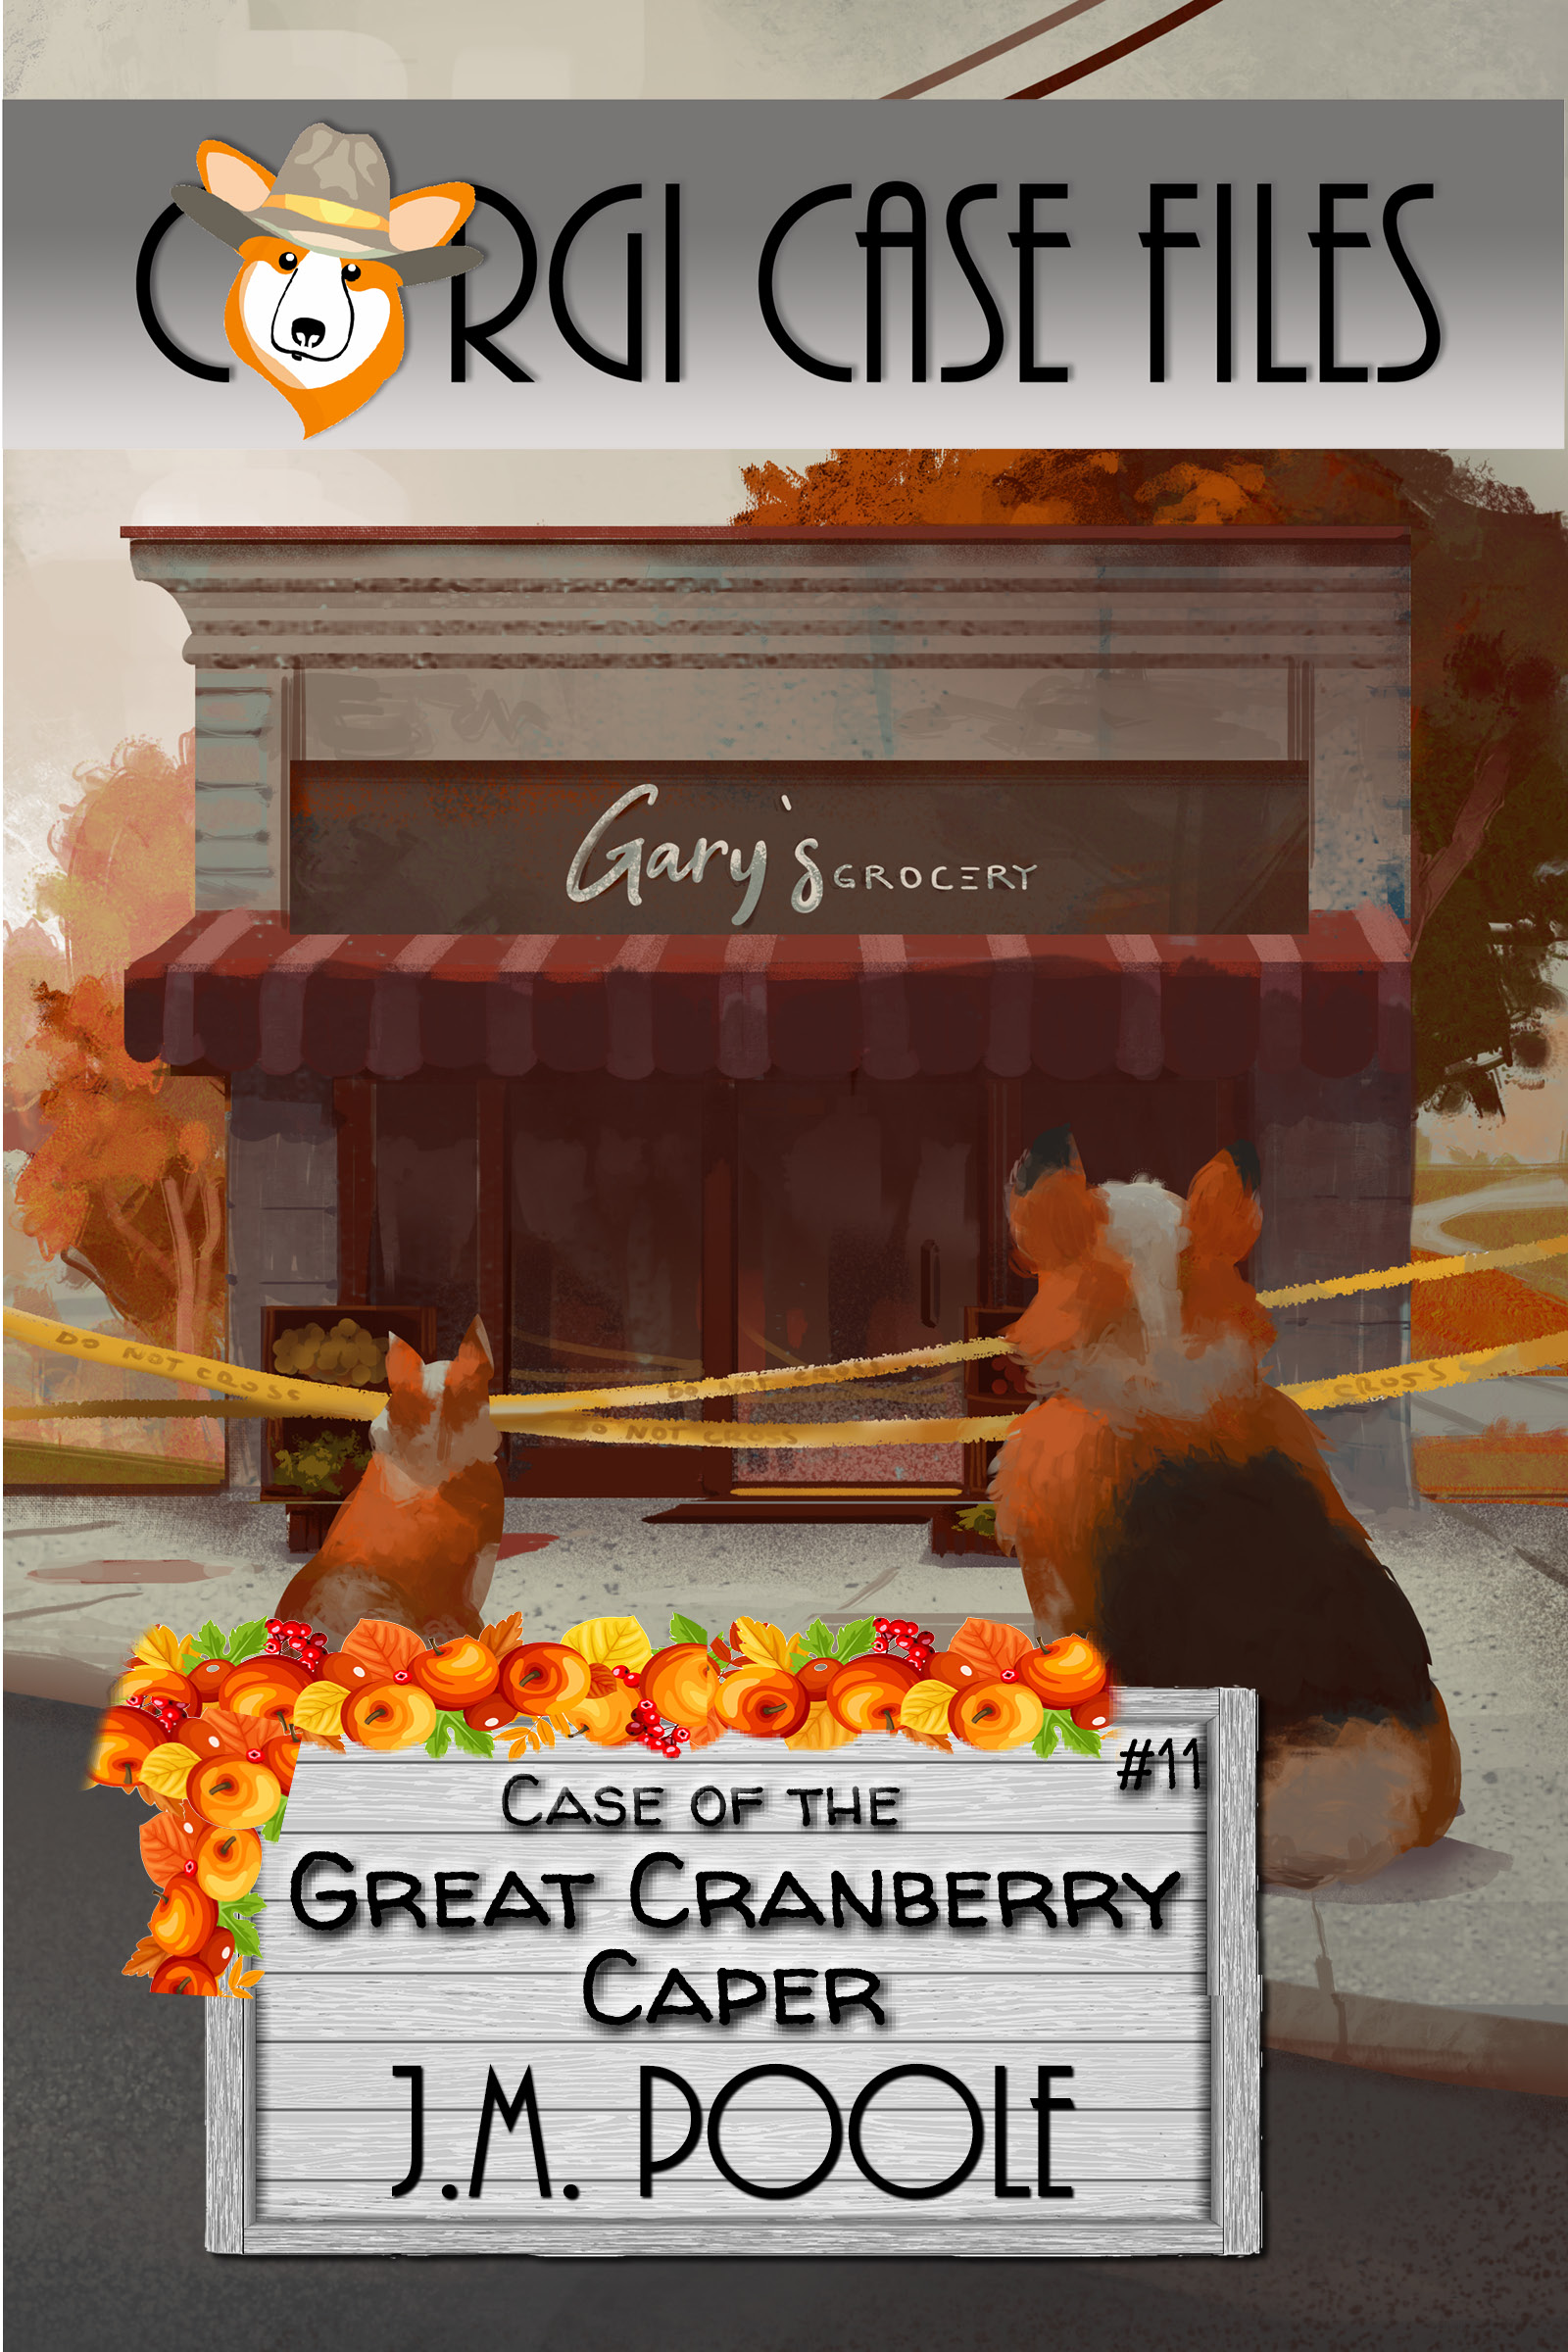 Case of the Great Cranberry Caper